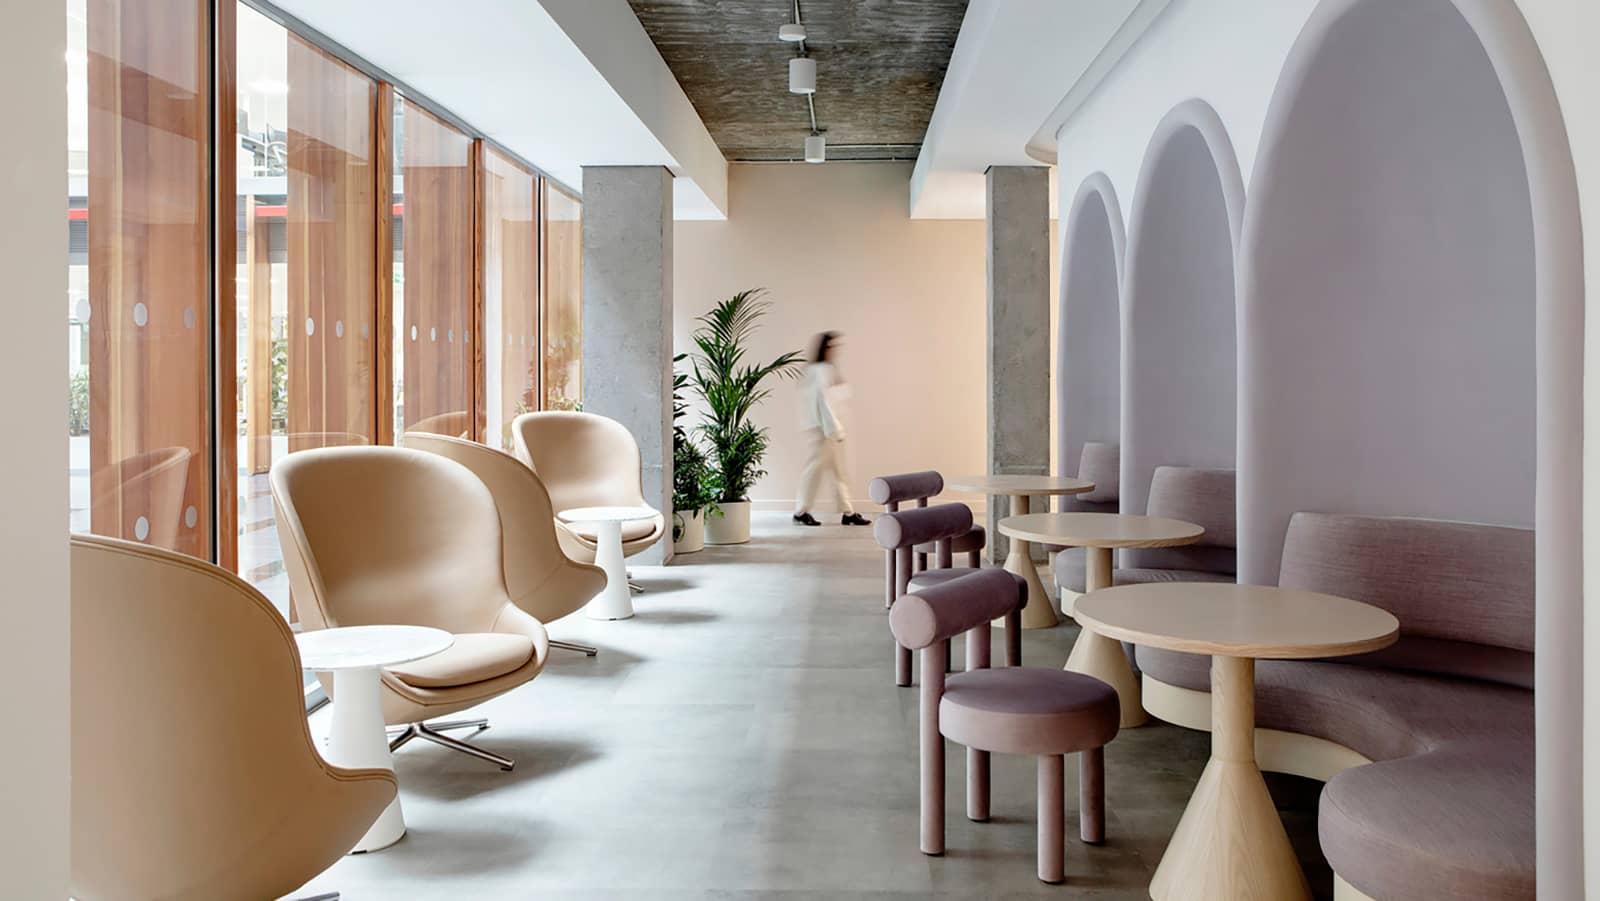 The halls in Dropbox's Dublin offices feature nooks with comfortable pink seats, partnered with open beige armchairs.